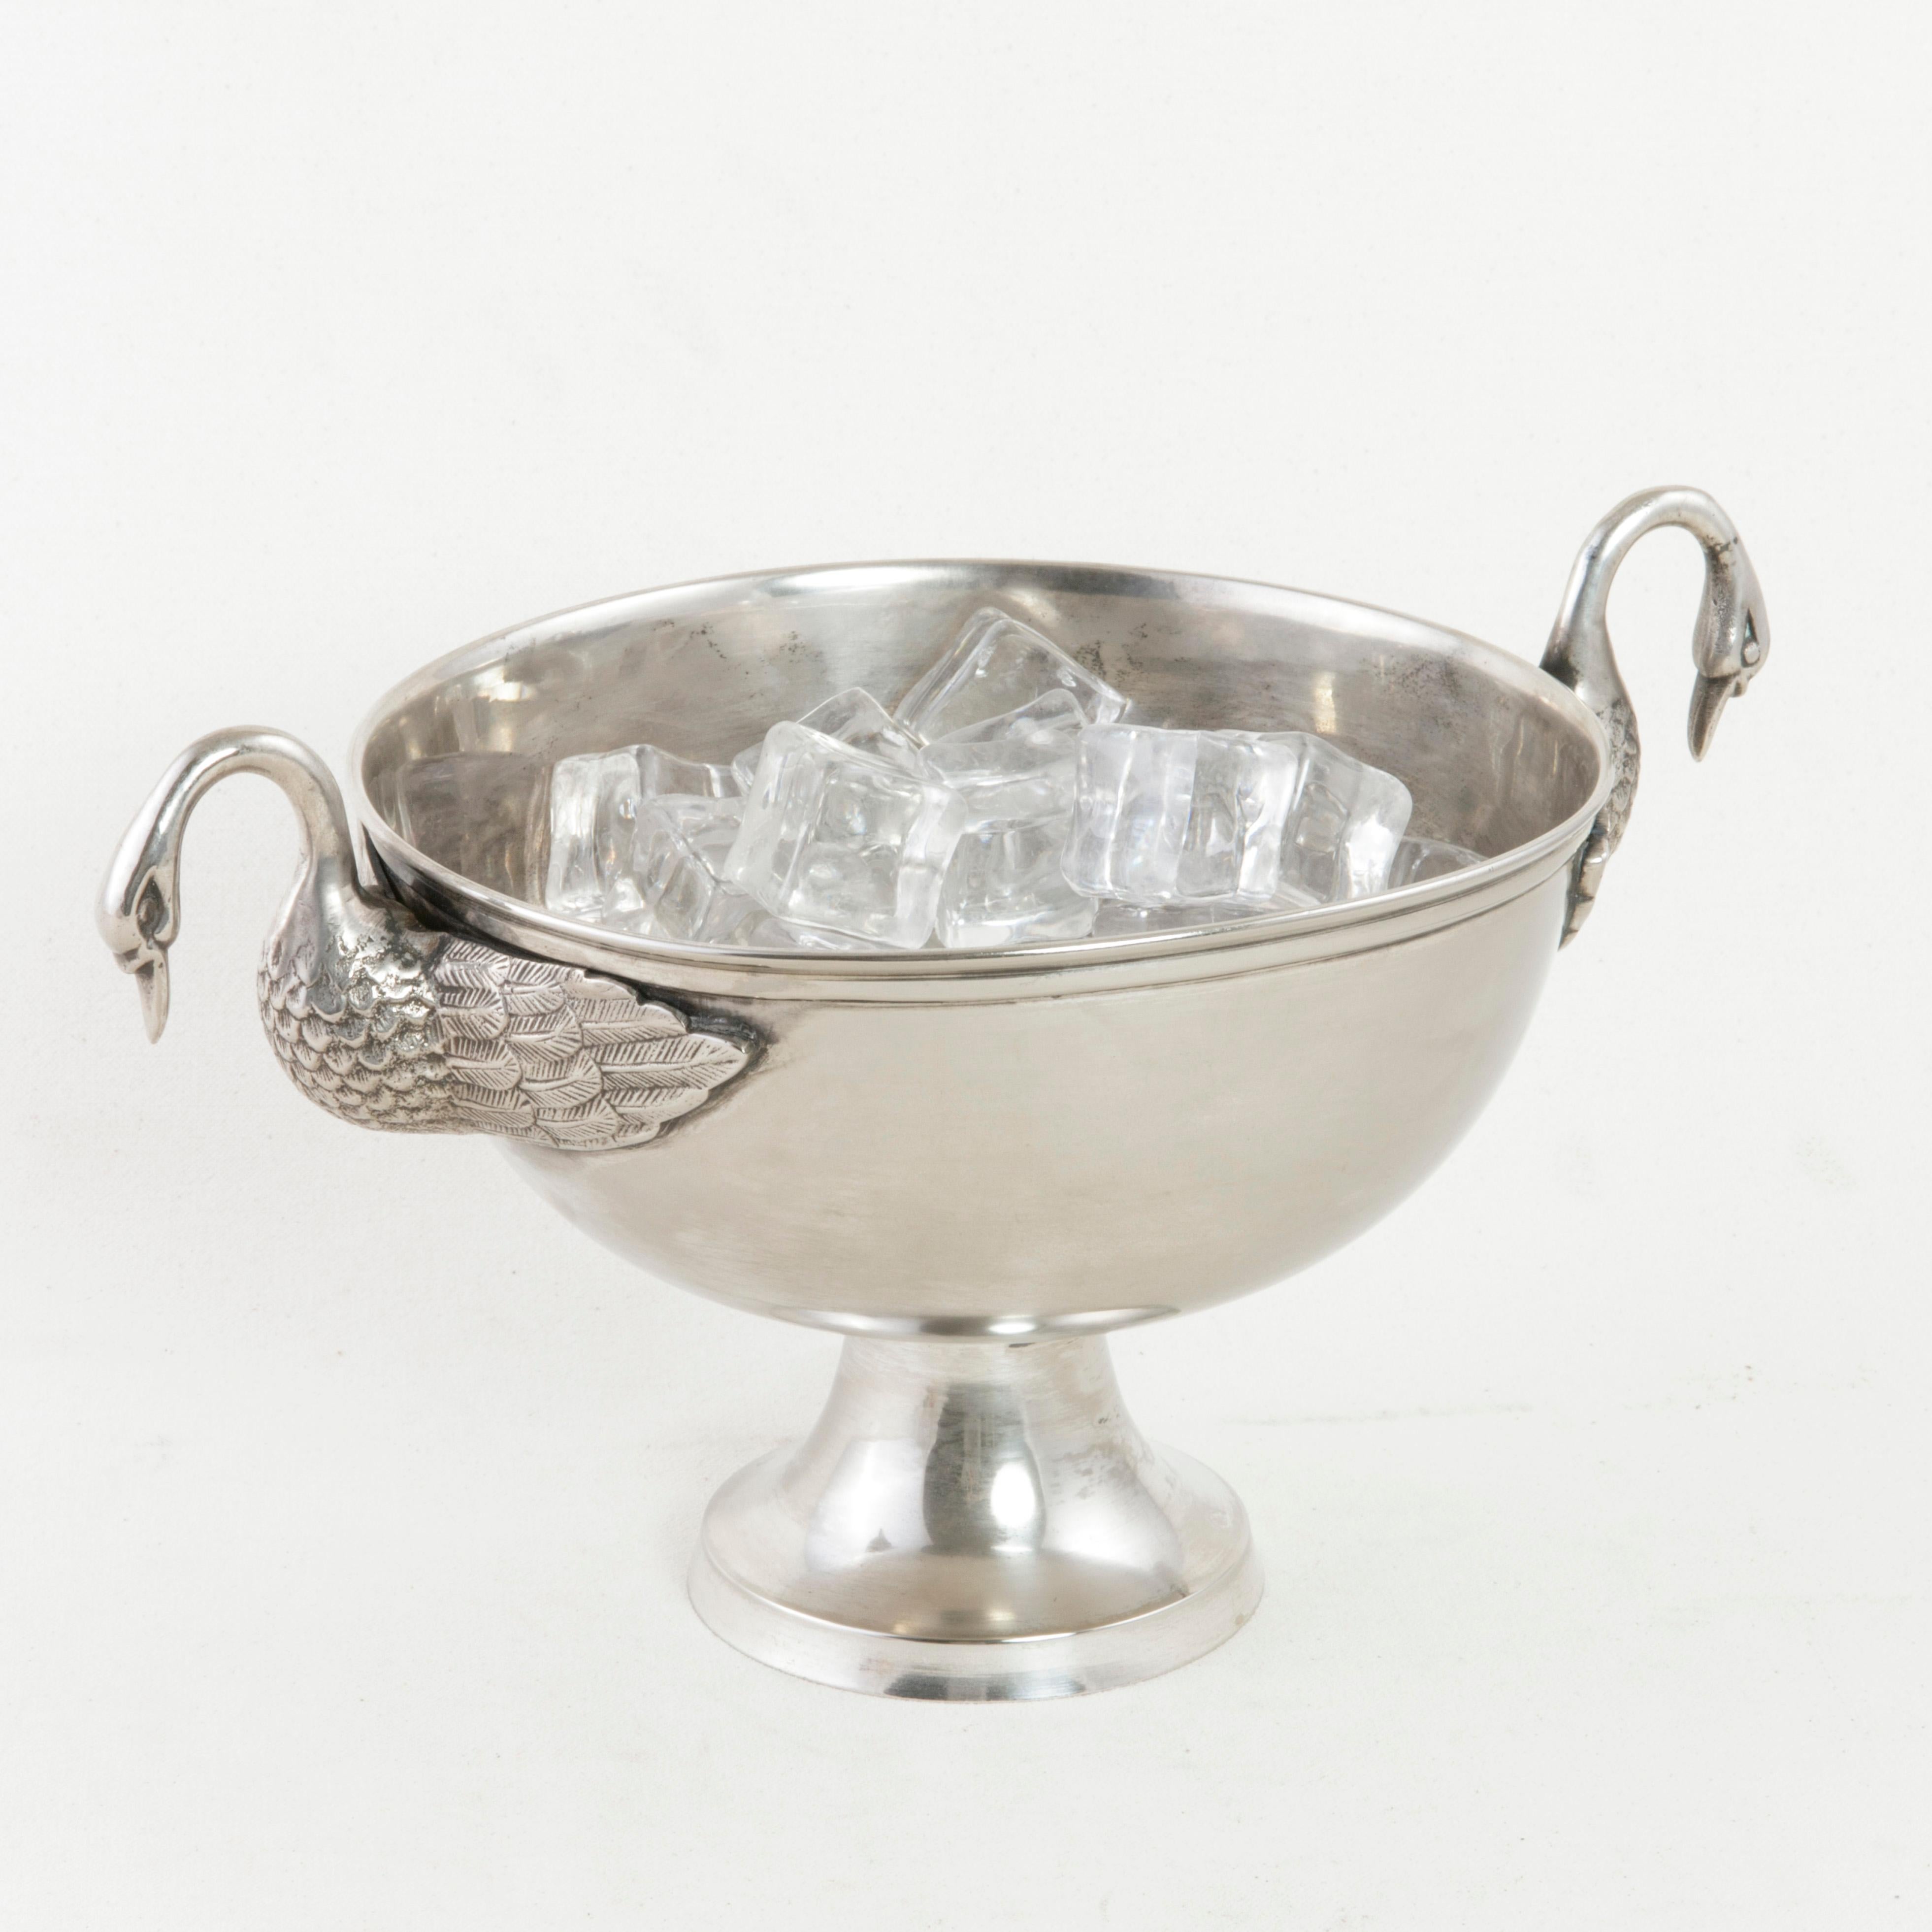 This late 19th century French Restauration style ice bucket features two handles formed by swans with wings spread. Resting on a footed base, the diameter of the bowl measures 8 inches. This piece is sure to make a statement when entertaining guests